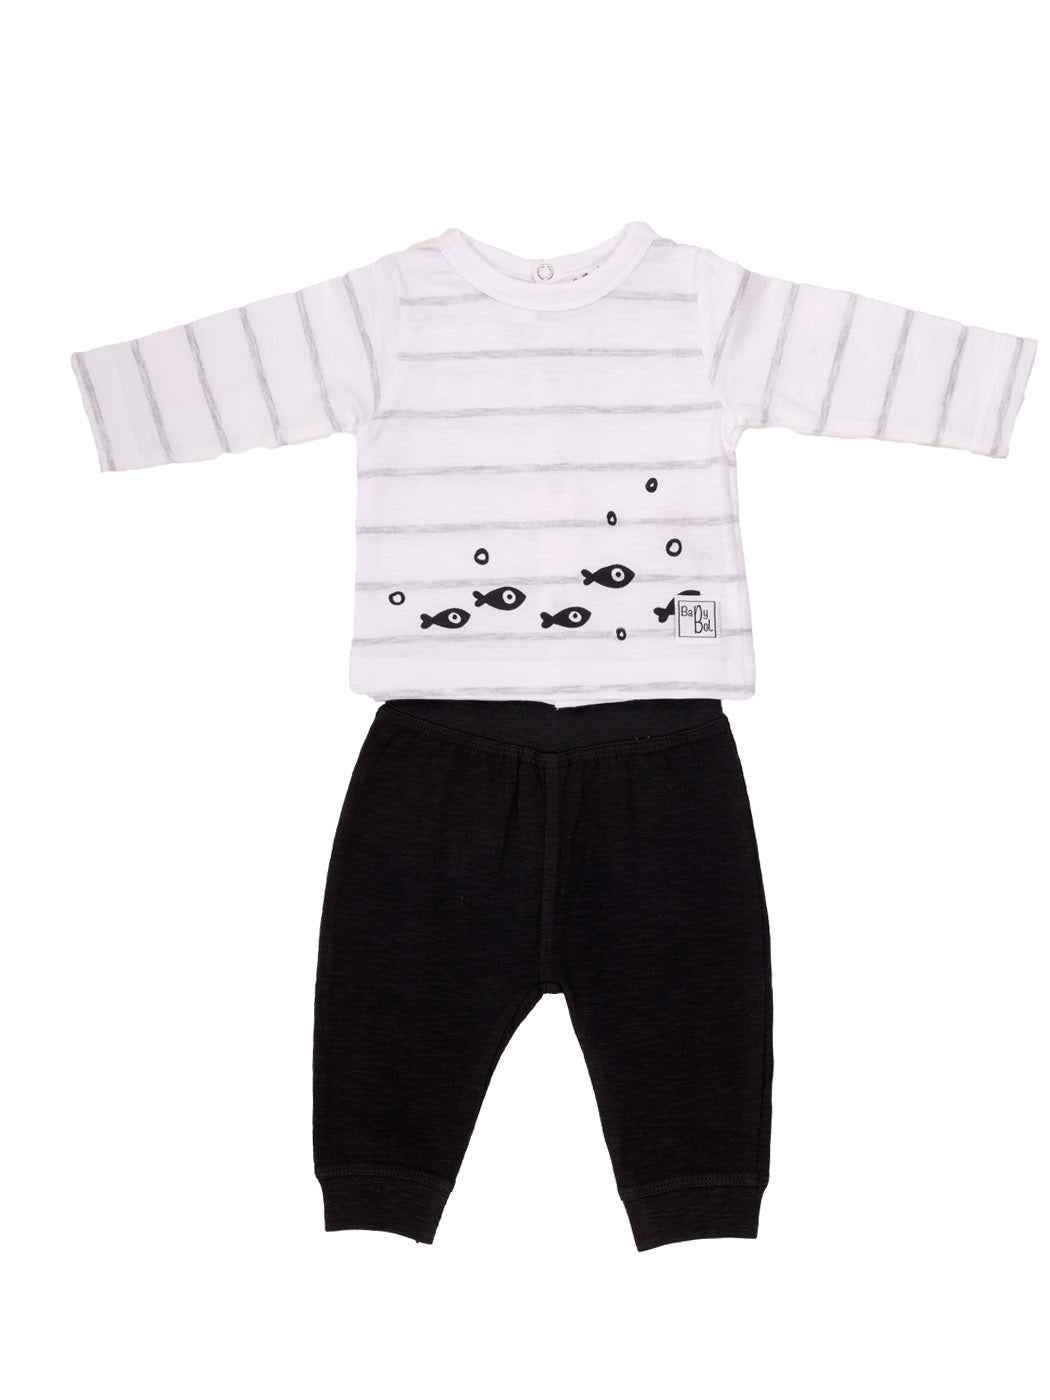 Baby Outfit 2pcs Art. 11815